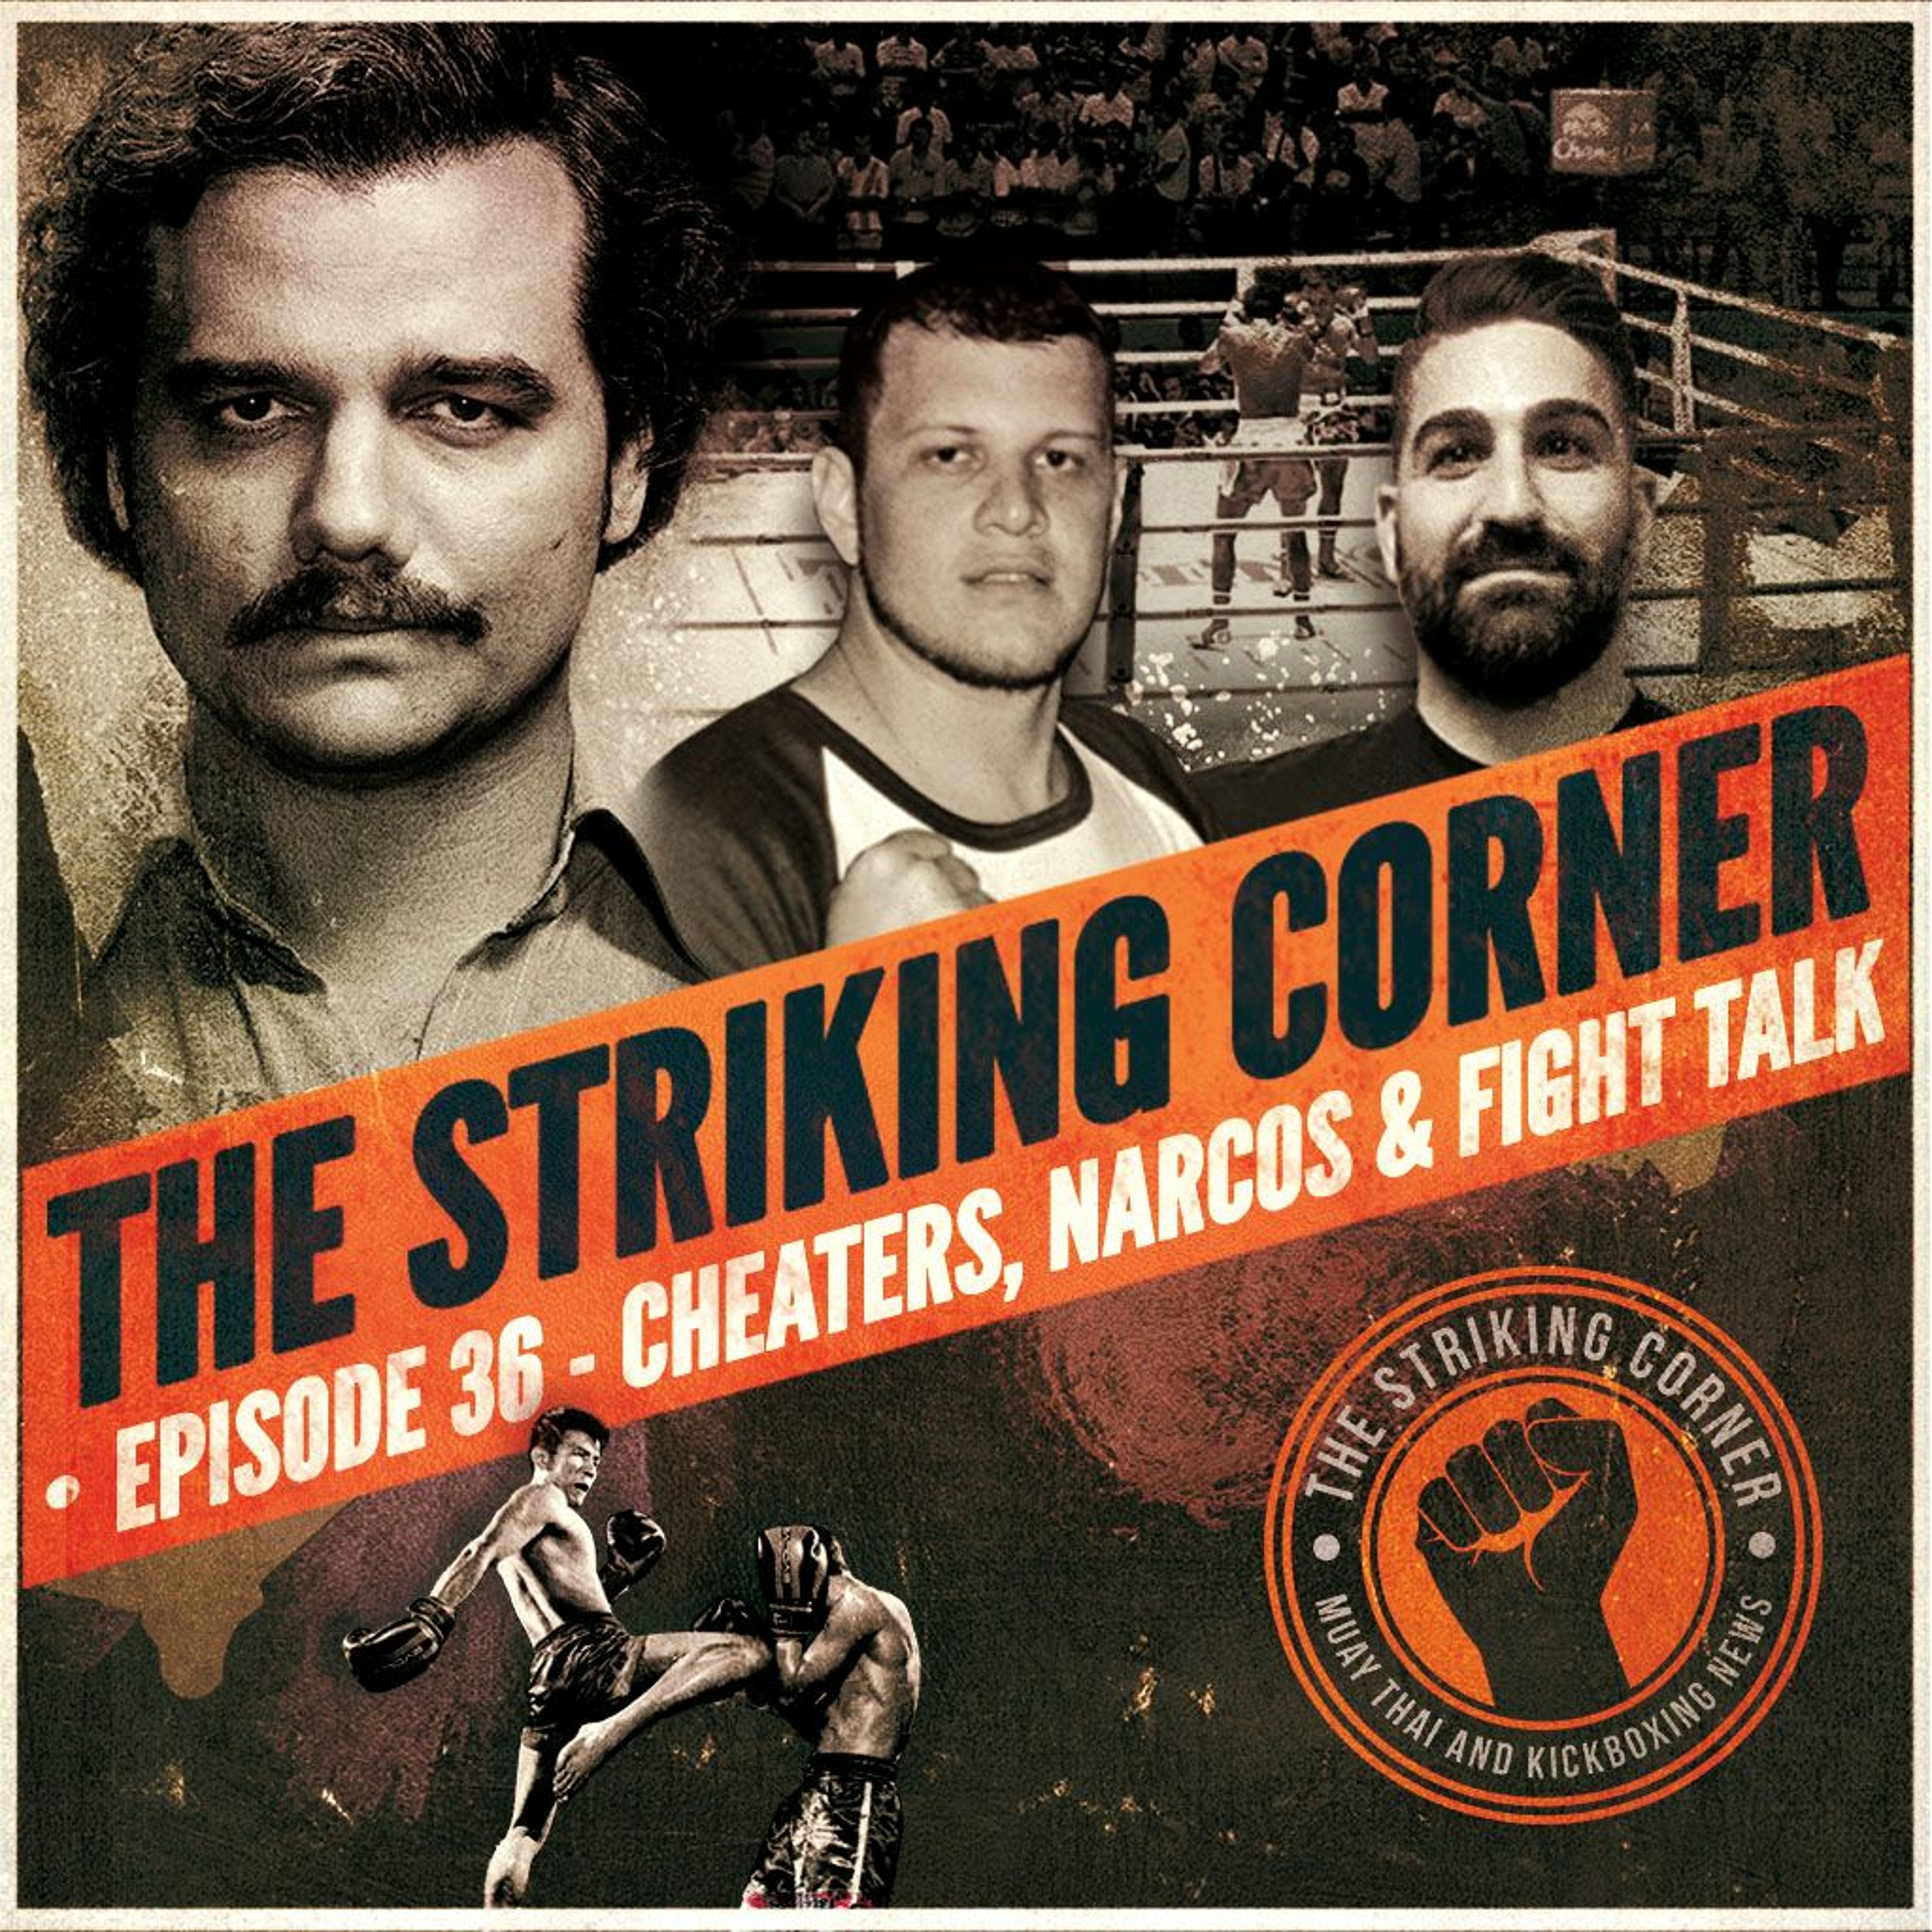 Ep. 36 - Cheaters, Narcos, & Fight Talk